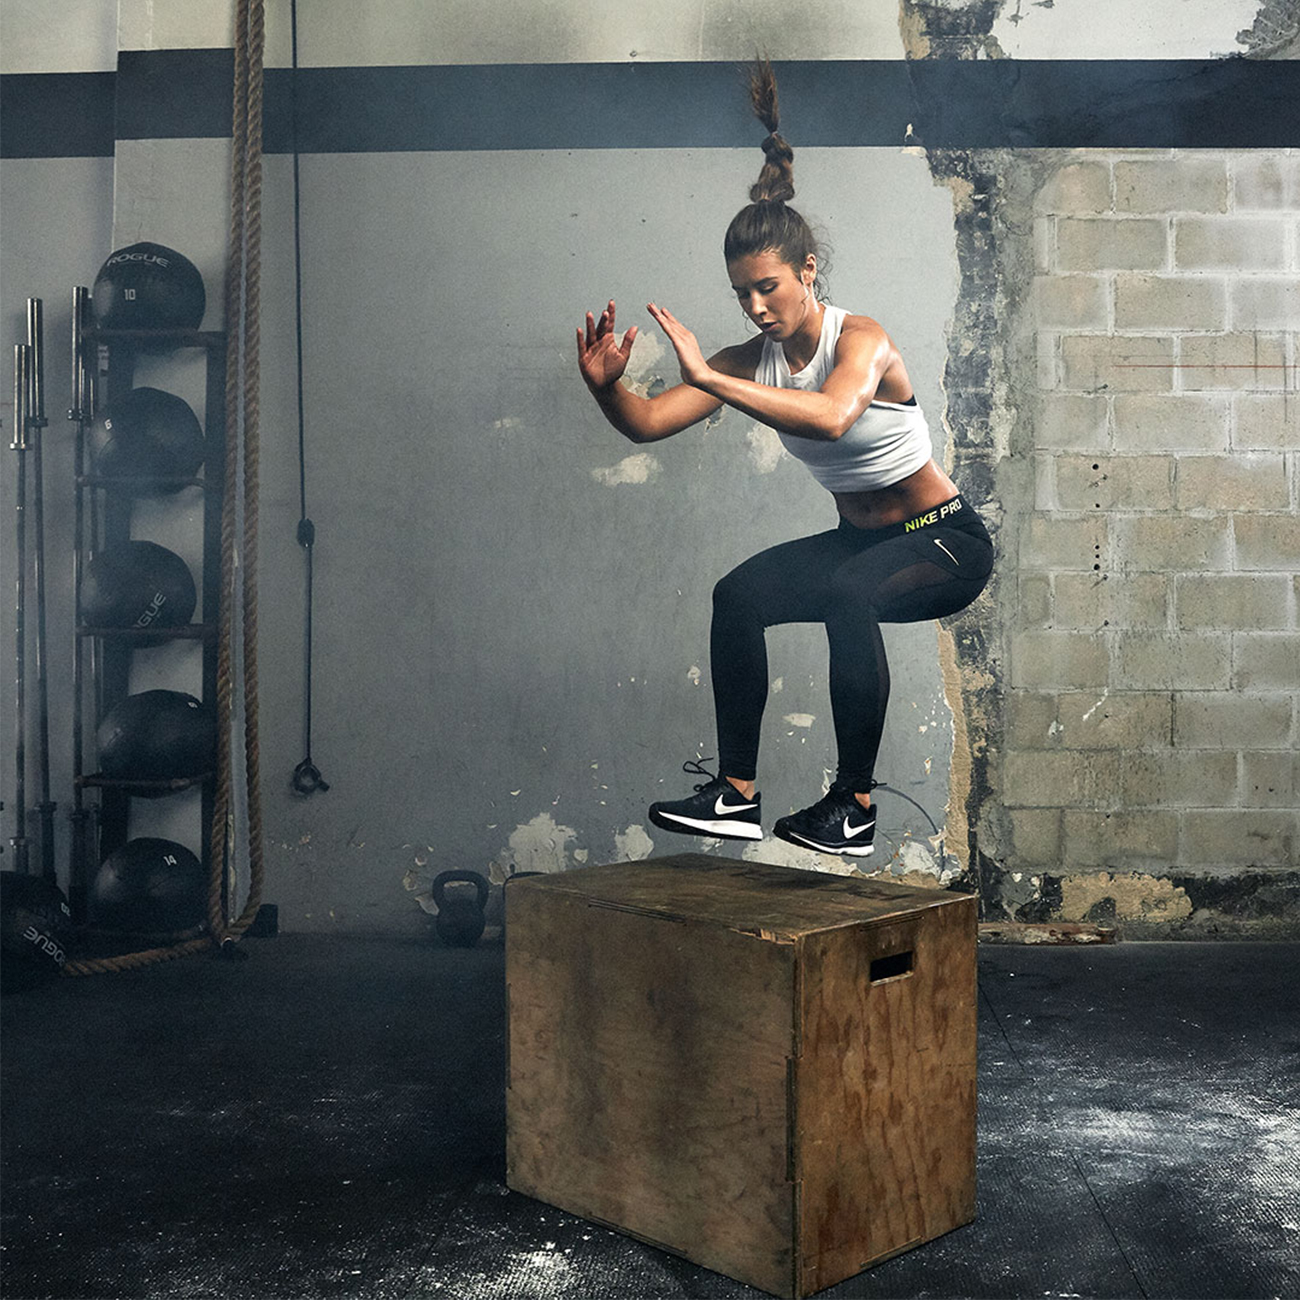 female athlete jumping on wooden cross fit box during workout in the gym